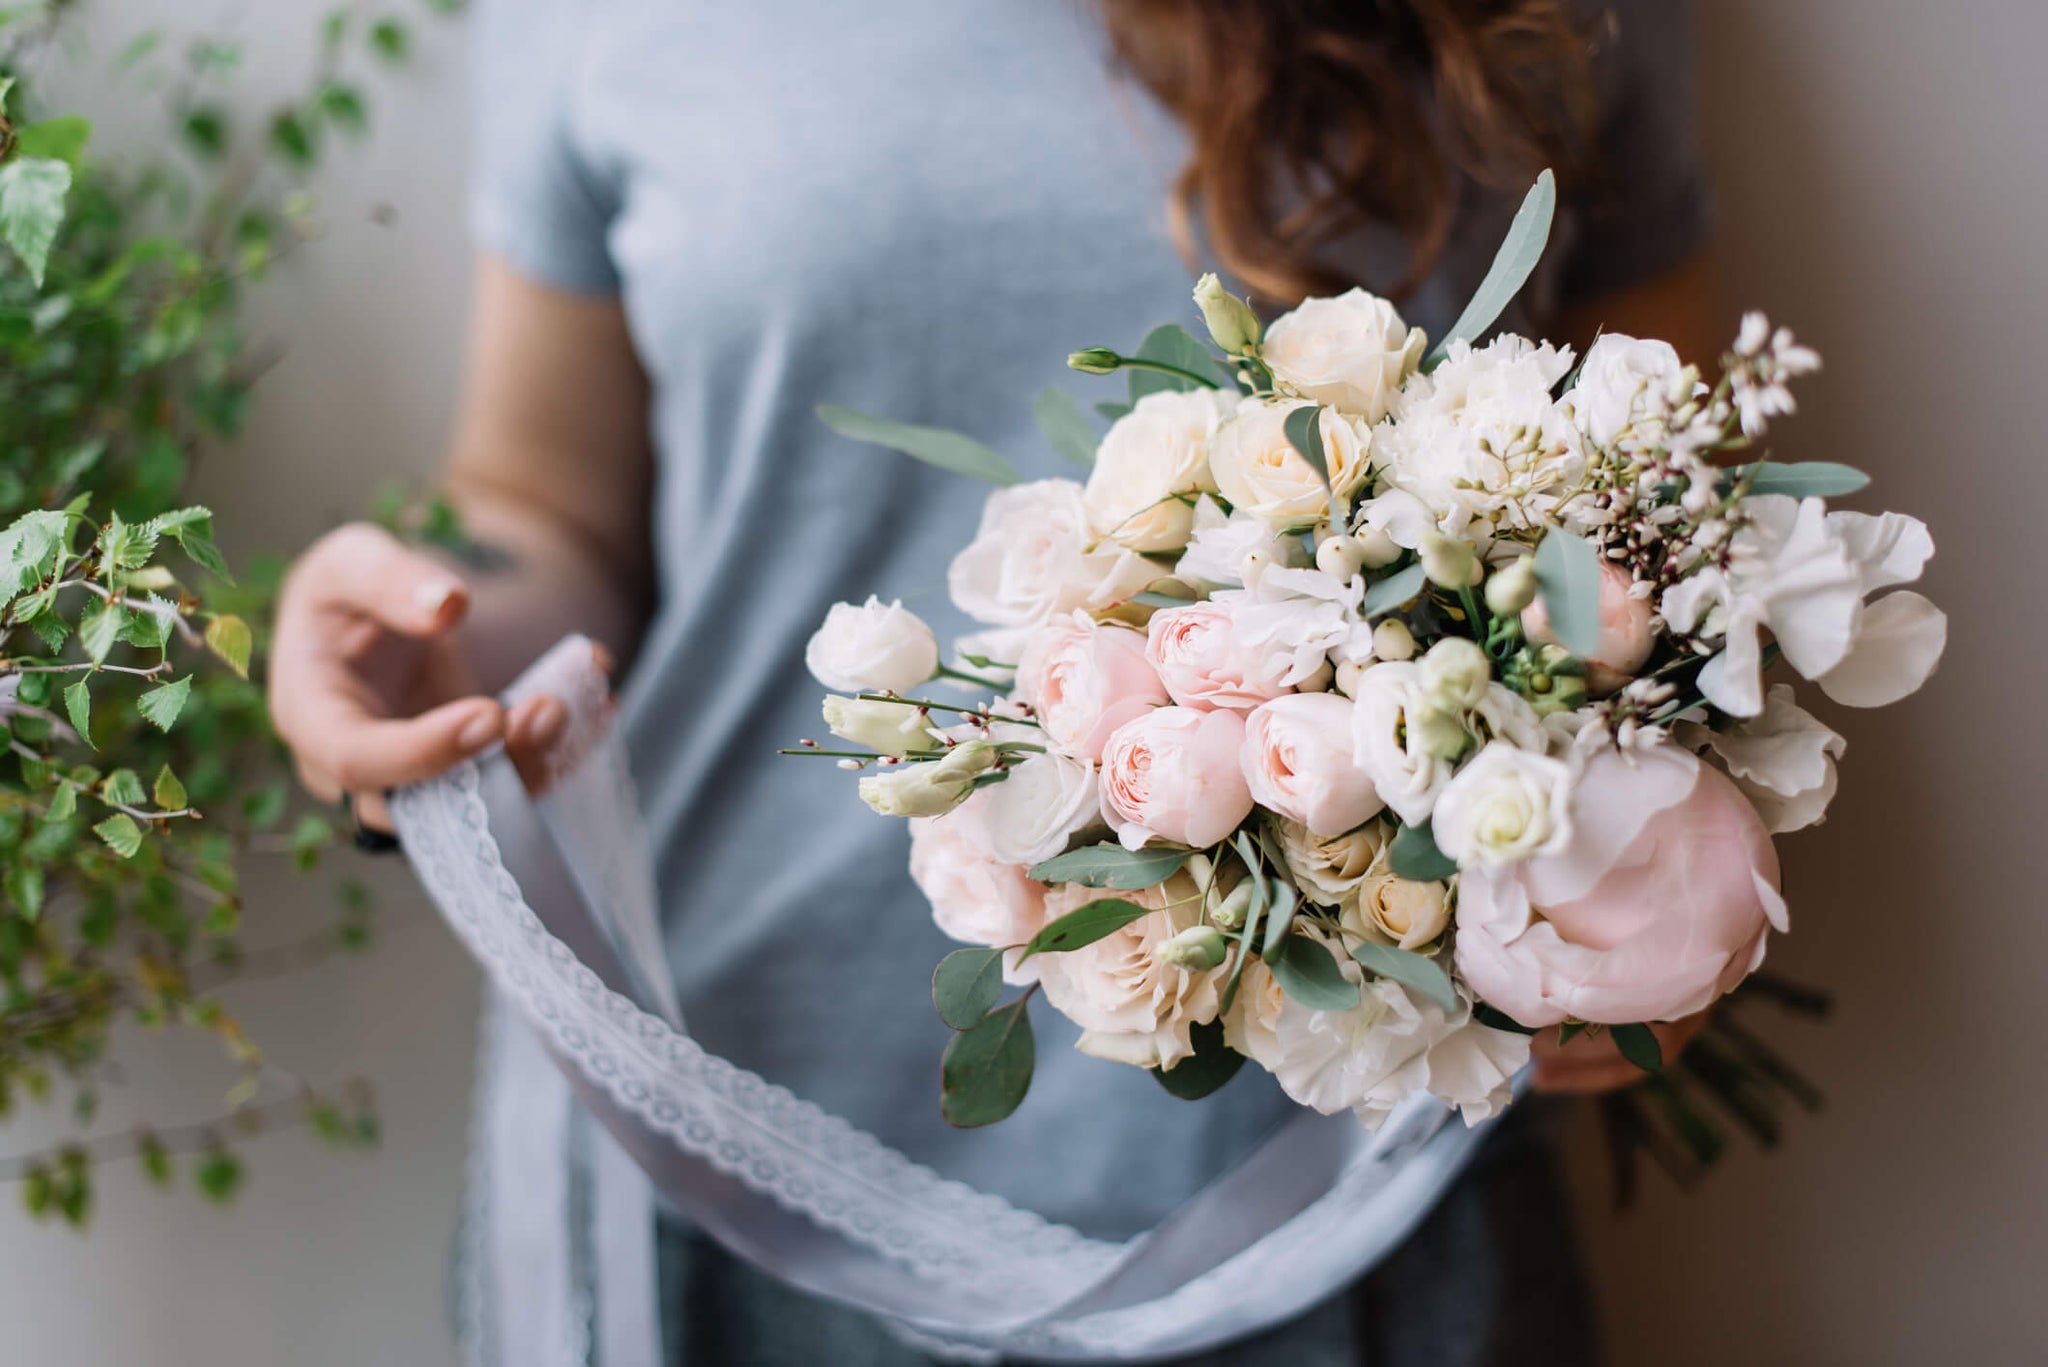 A woman adding white lace to a bouquet of flowers.